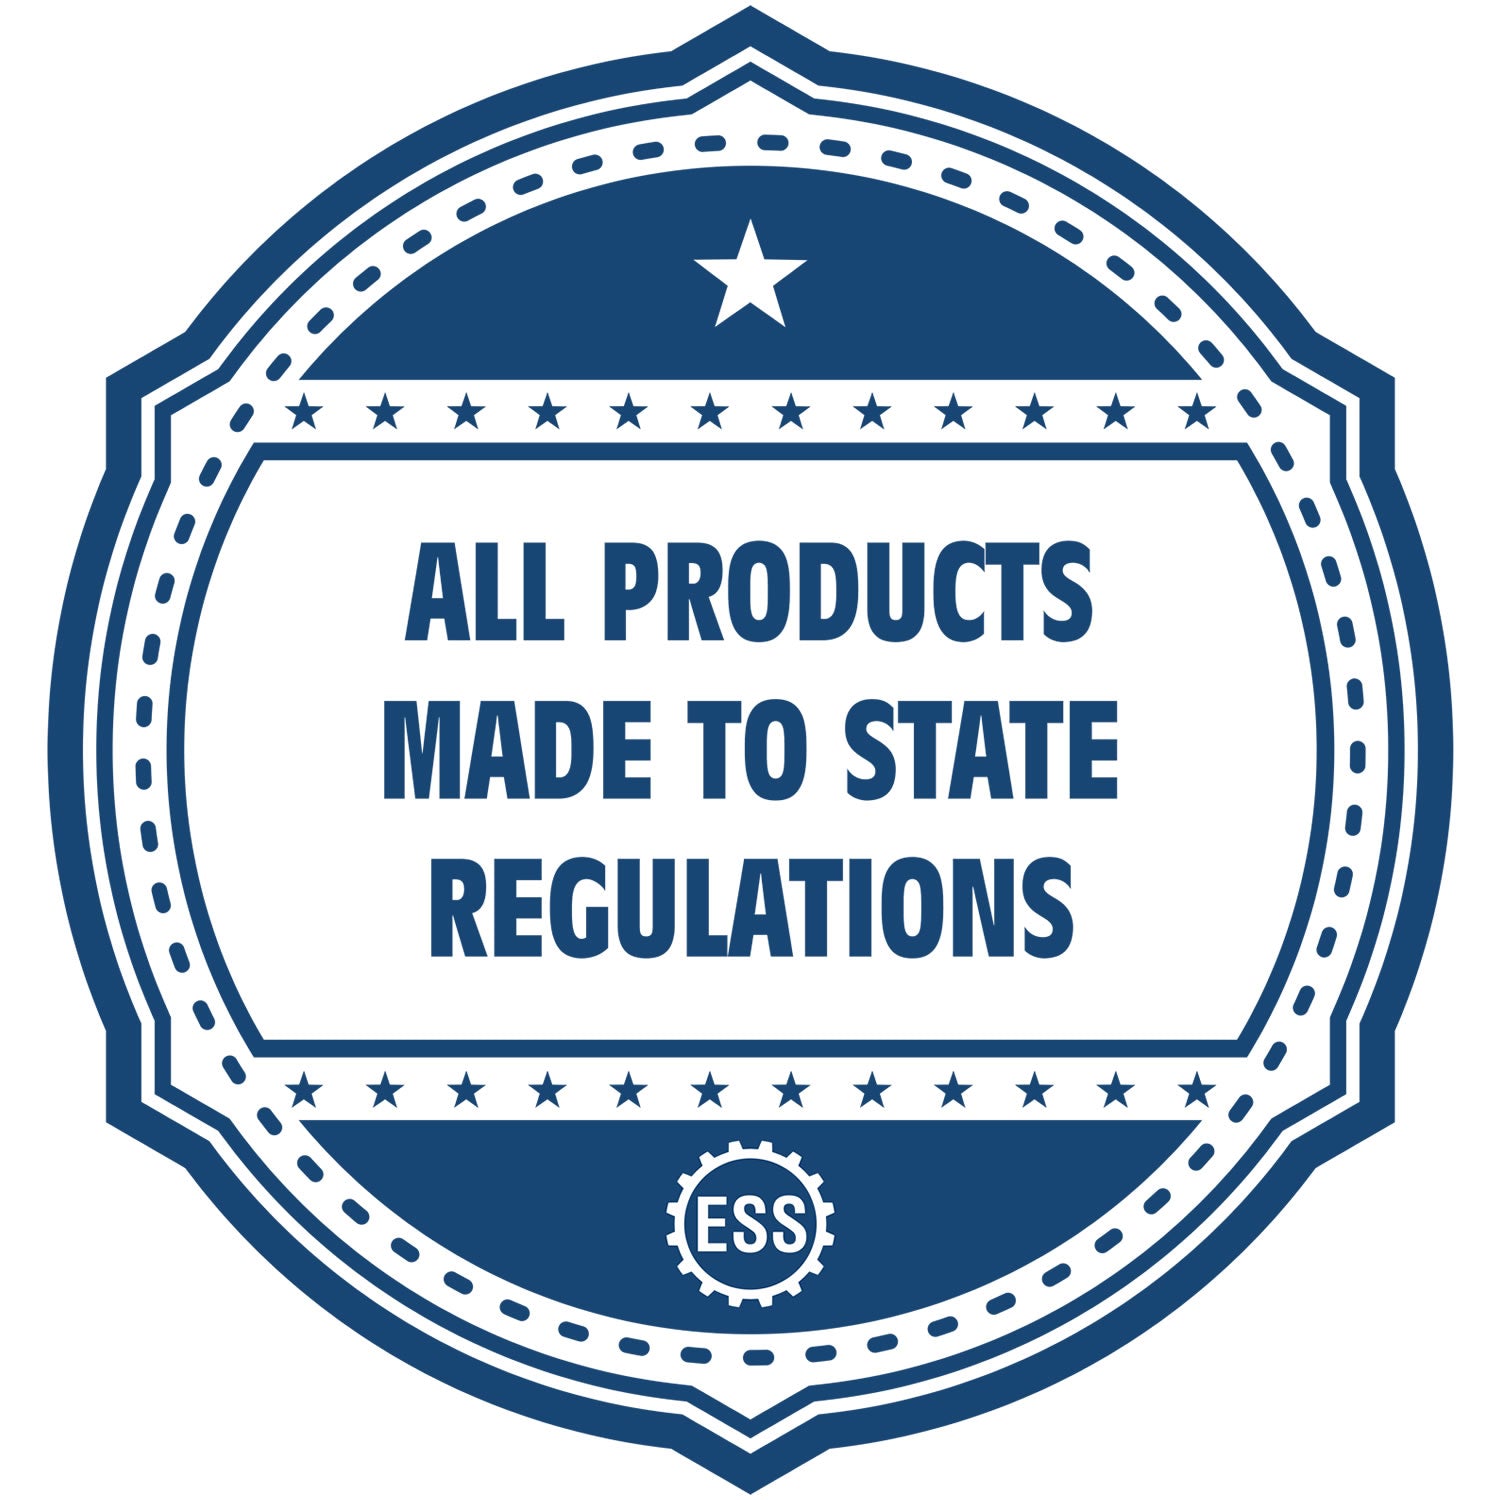 An icon or badge element for the Wooden Handle Mississippi State Seal Notary Public Stamp showing that this product is made in compliance with state regulations.